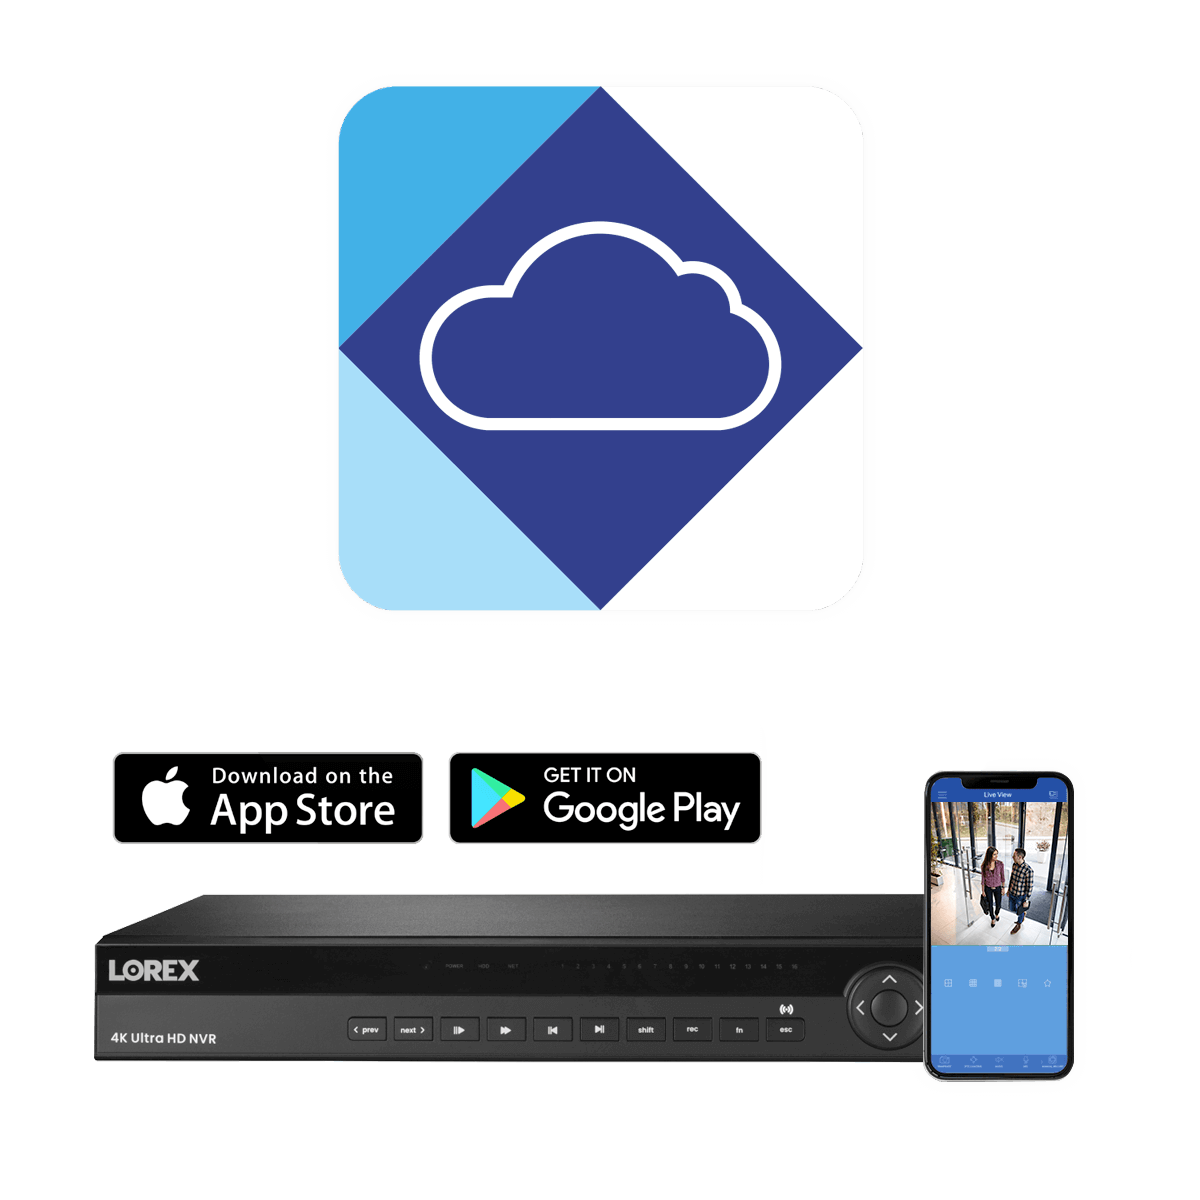 Remotely stay connected to security system with Lorex Cloud app